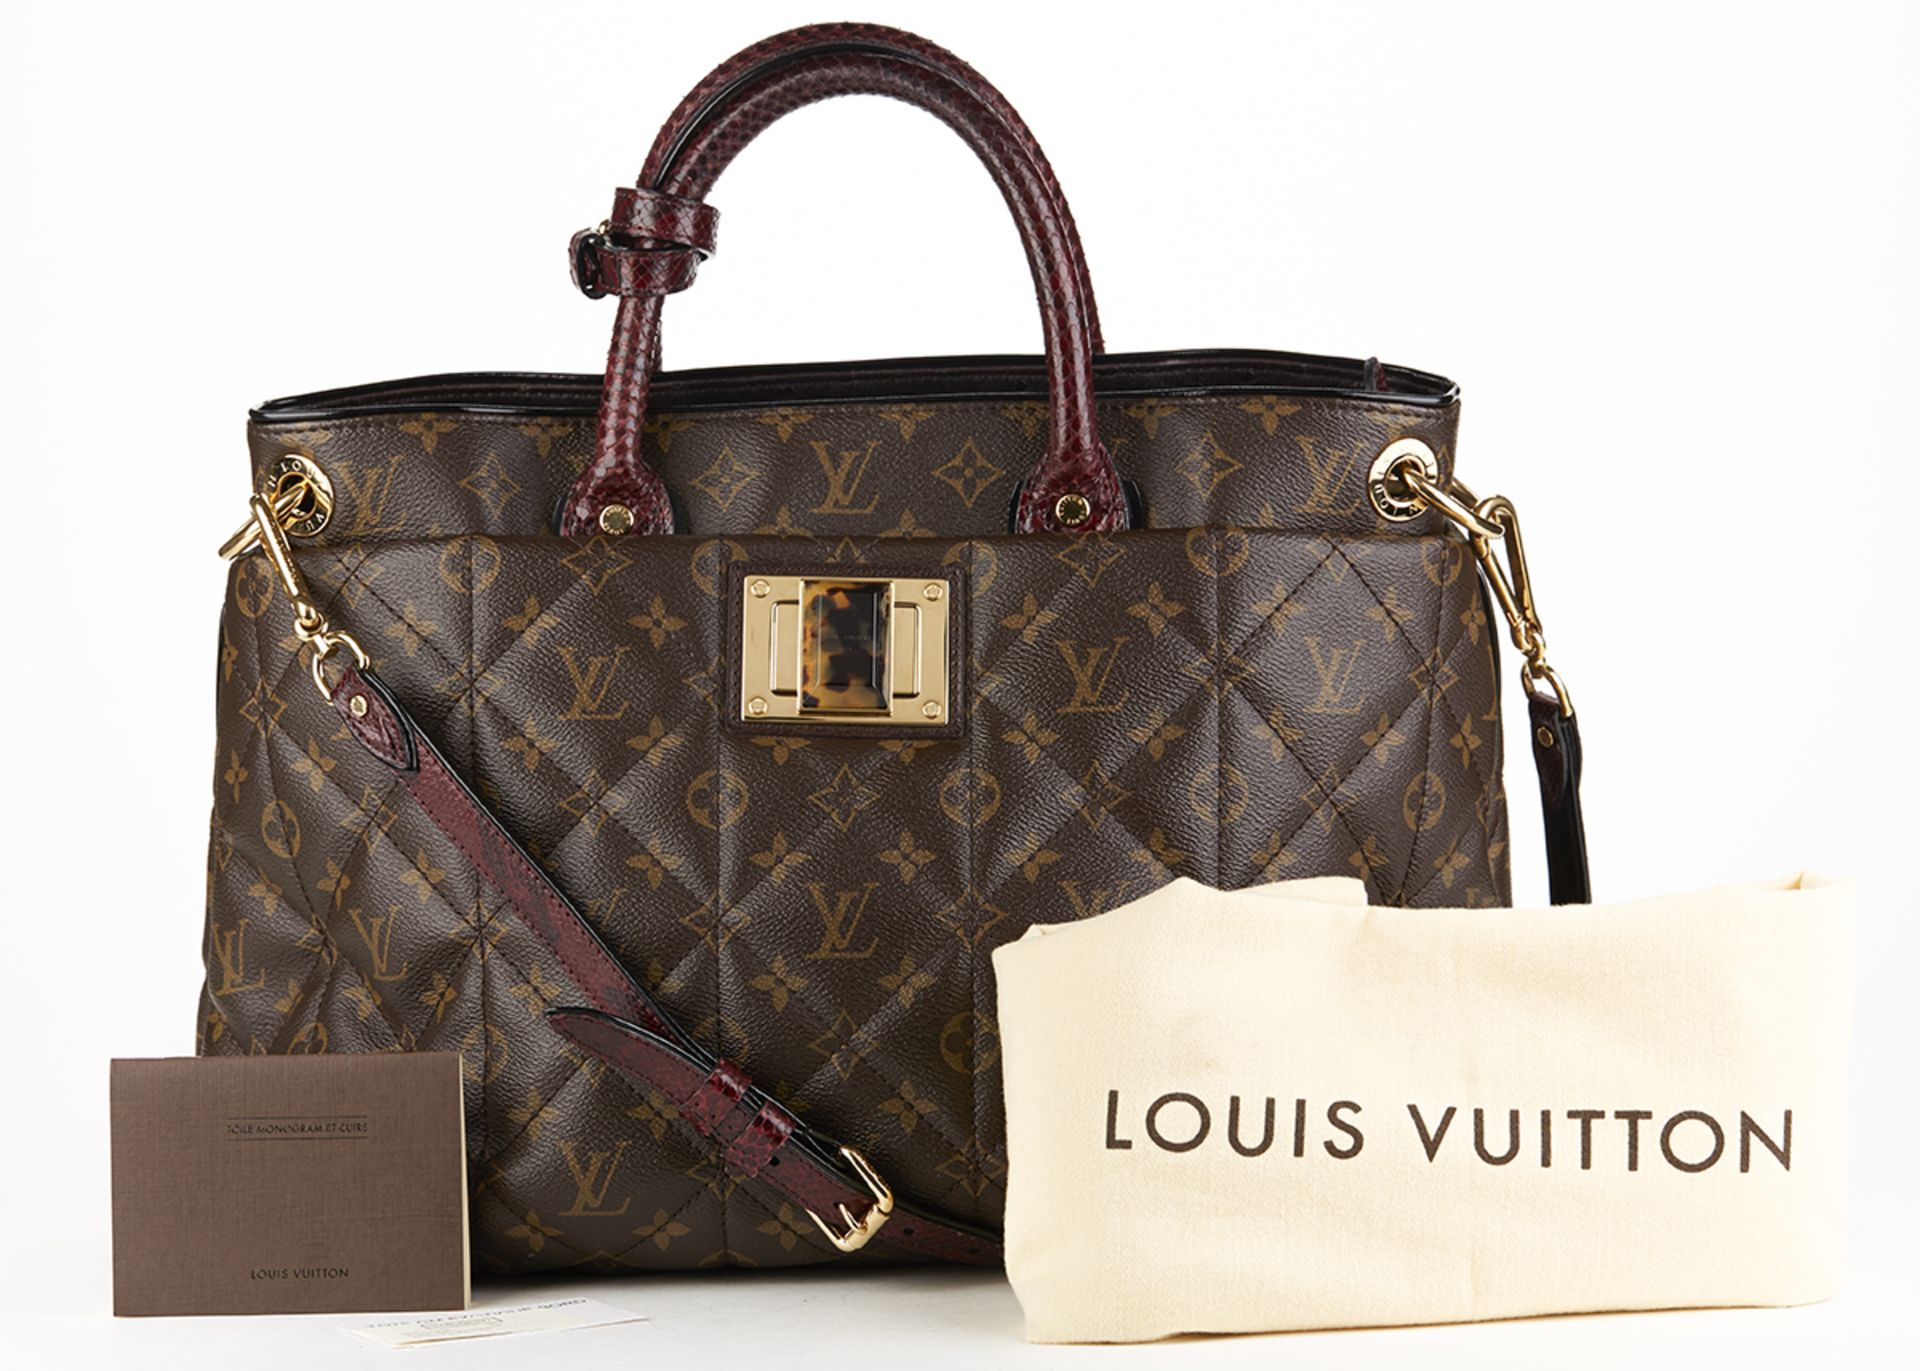 LOUIS VUITTON Tote Monogram Etoile , - Brown Classic Monogram Canvas, Ostrich and Python Leather - Image 10 of 10